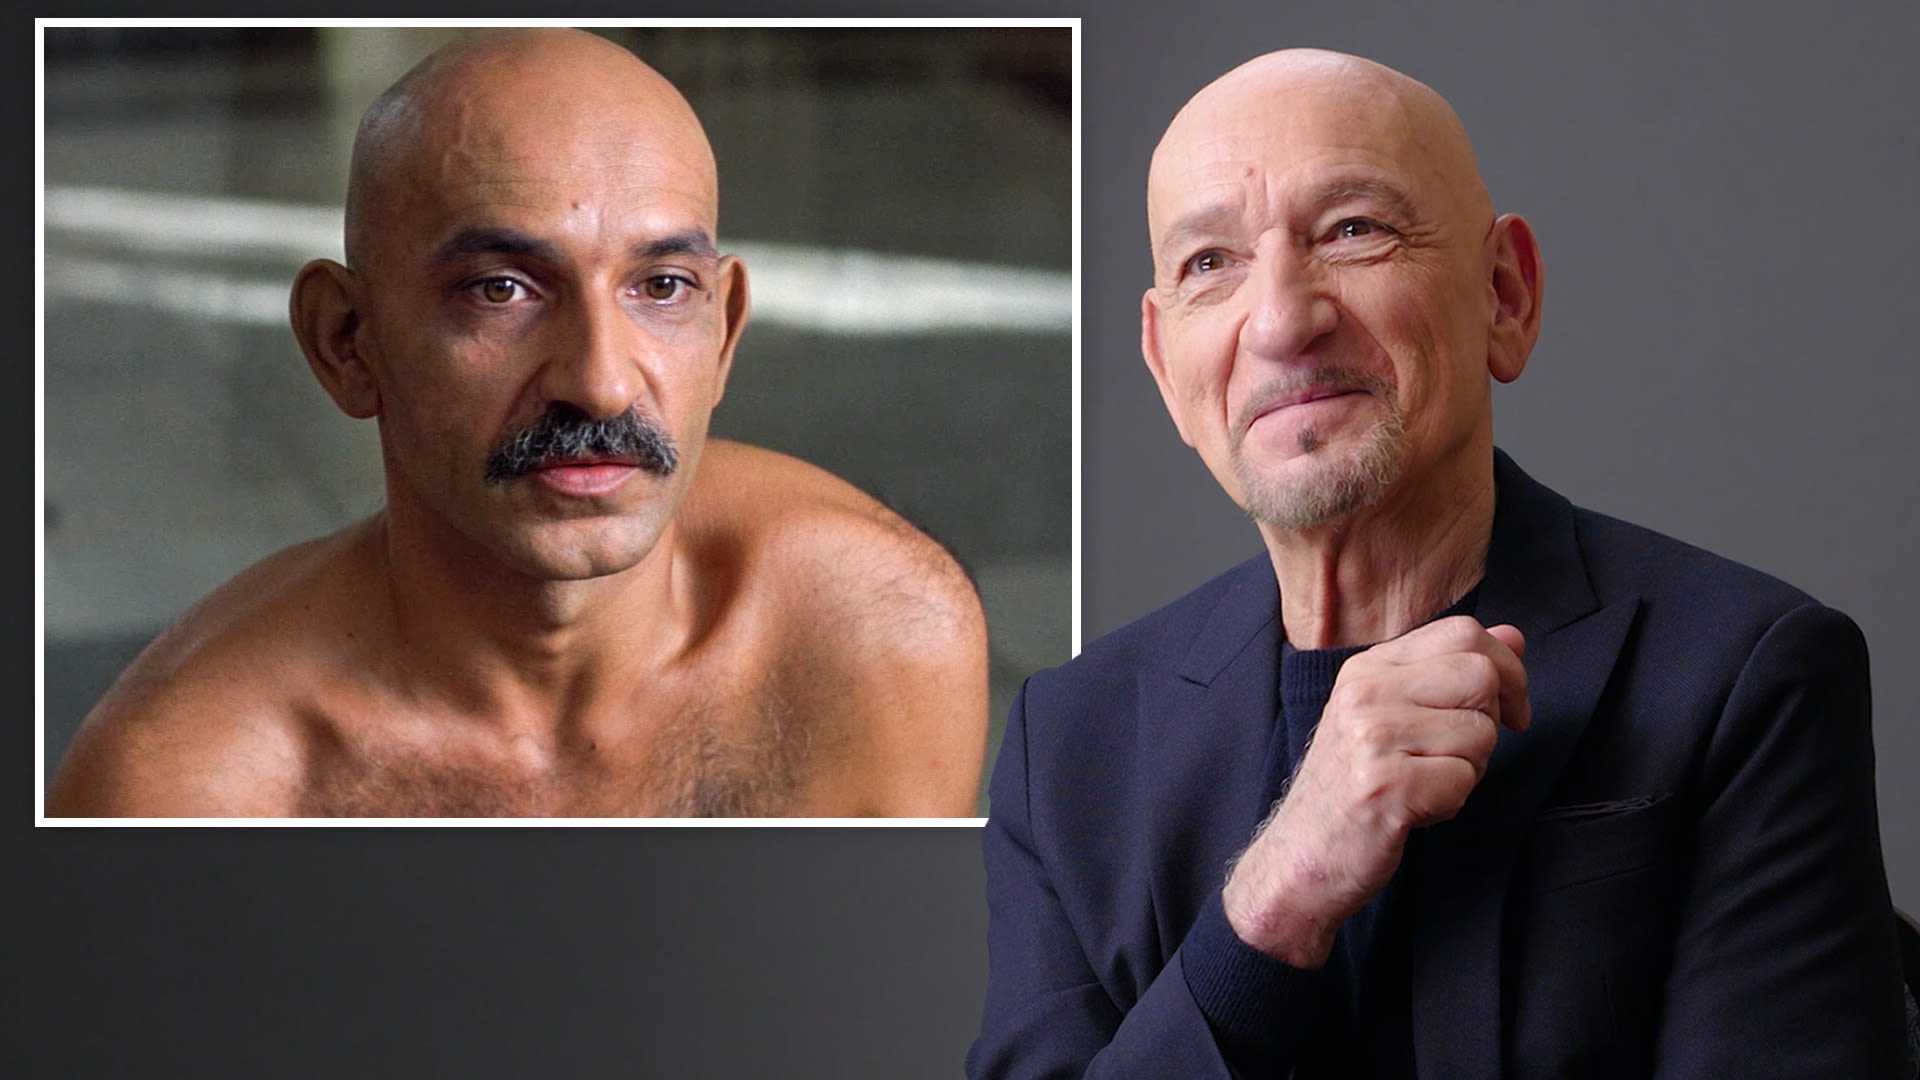 gq_iconic-characters-sir-ben-kingsley-breaks-down-his-most-iconic-characters.jpg